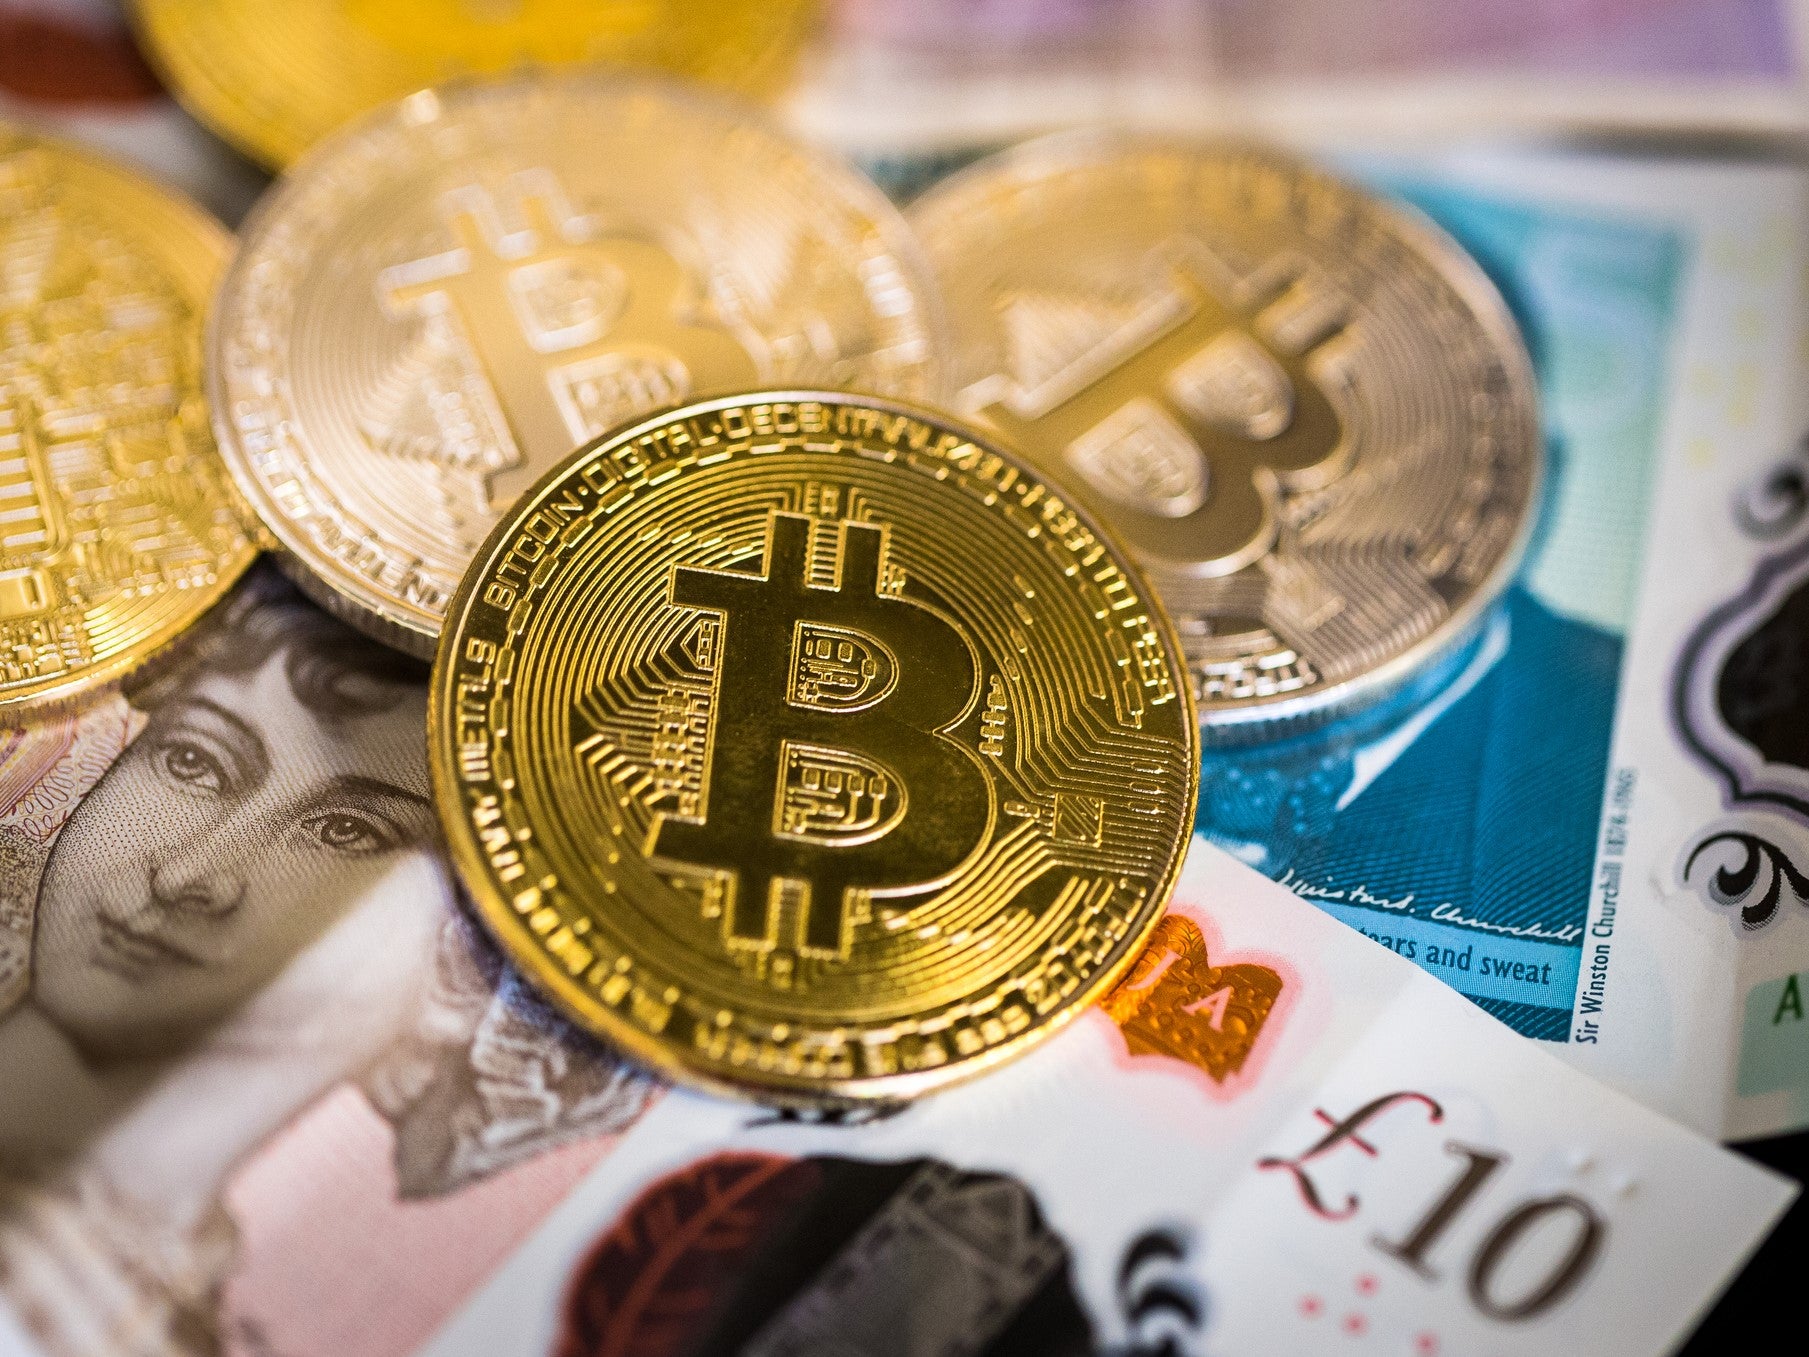 Customers of Homebase, Ocado and other UK retailers will be able to claim cashback in bitcoin from 2022